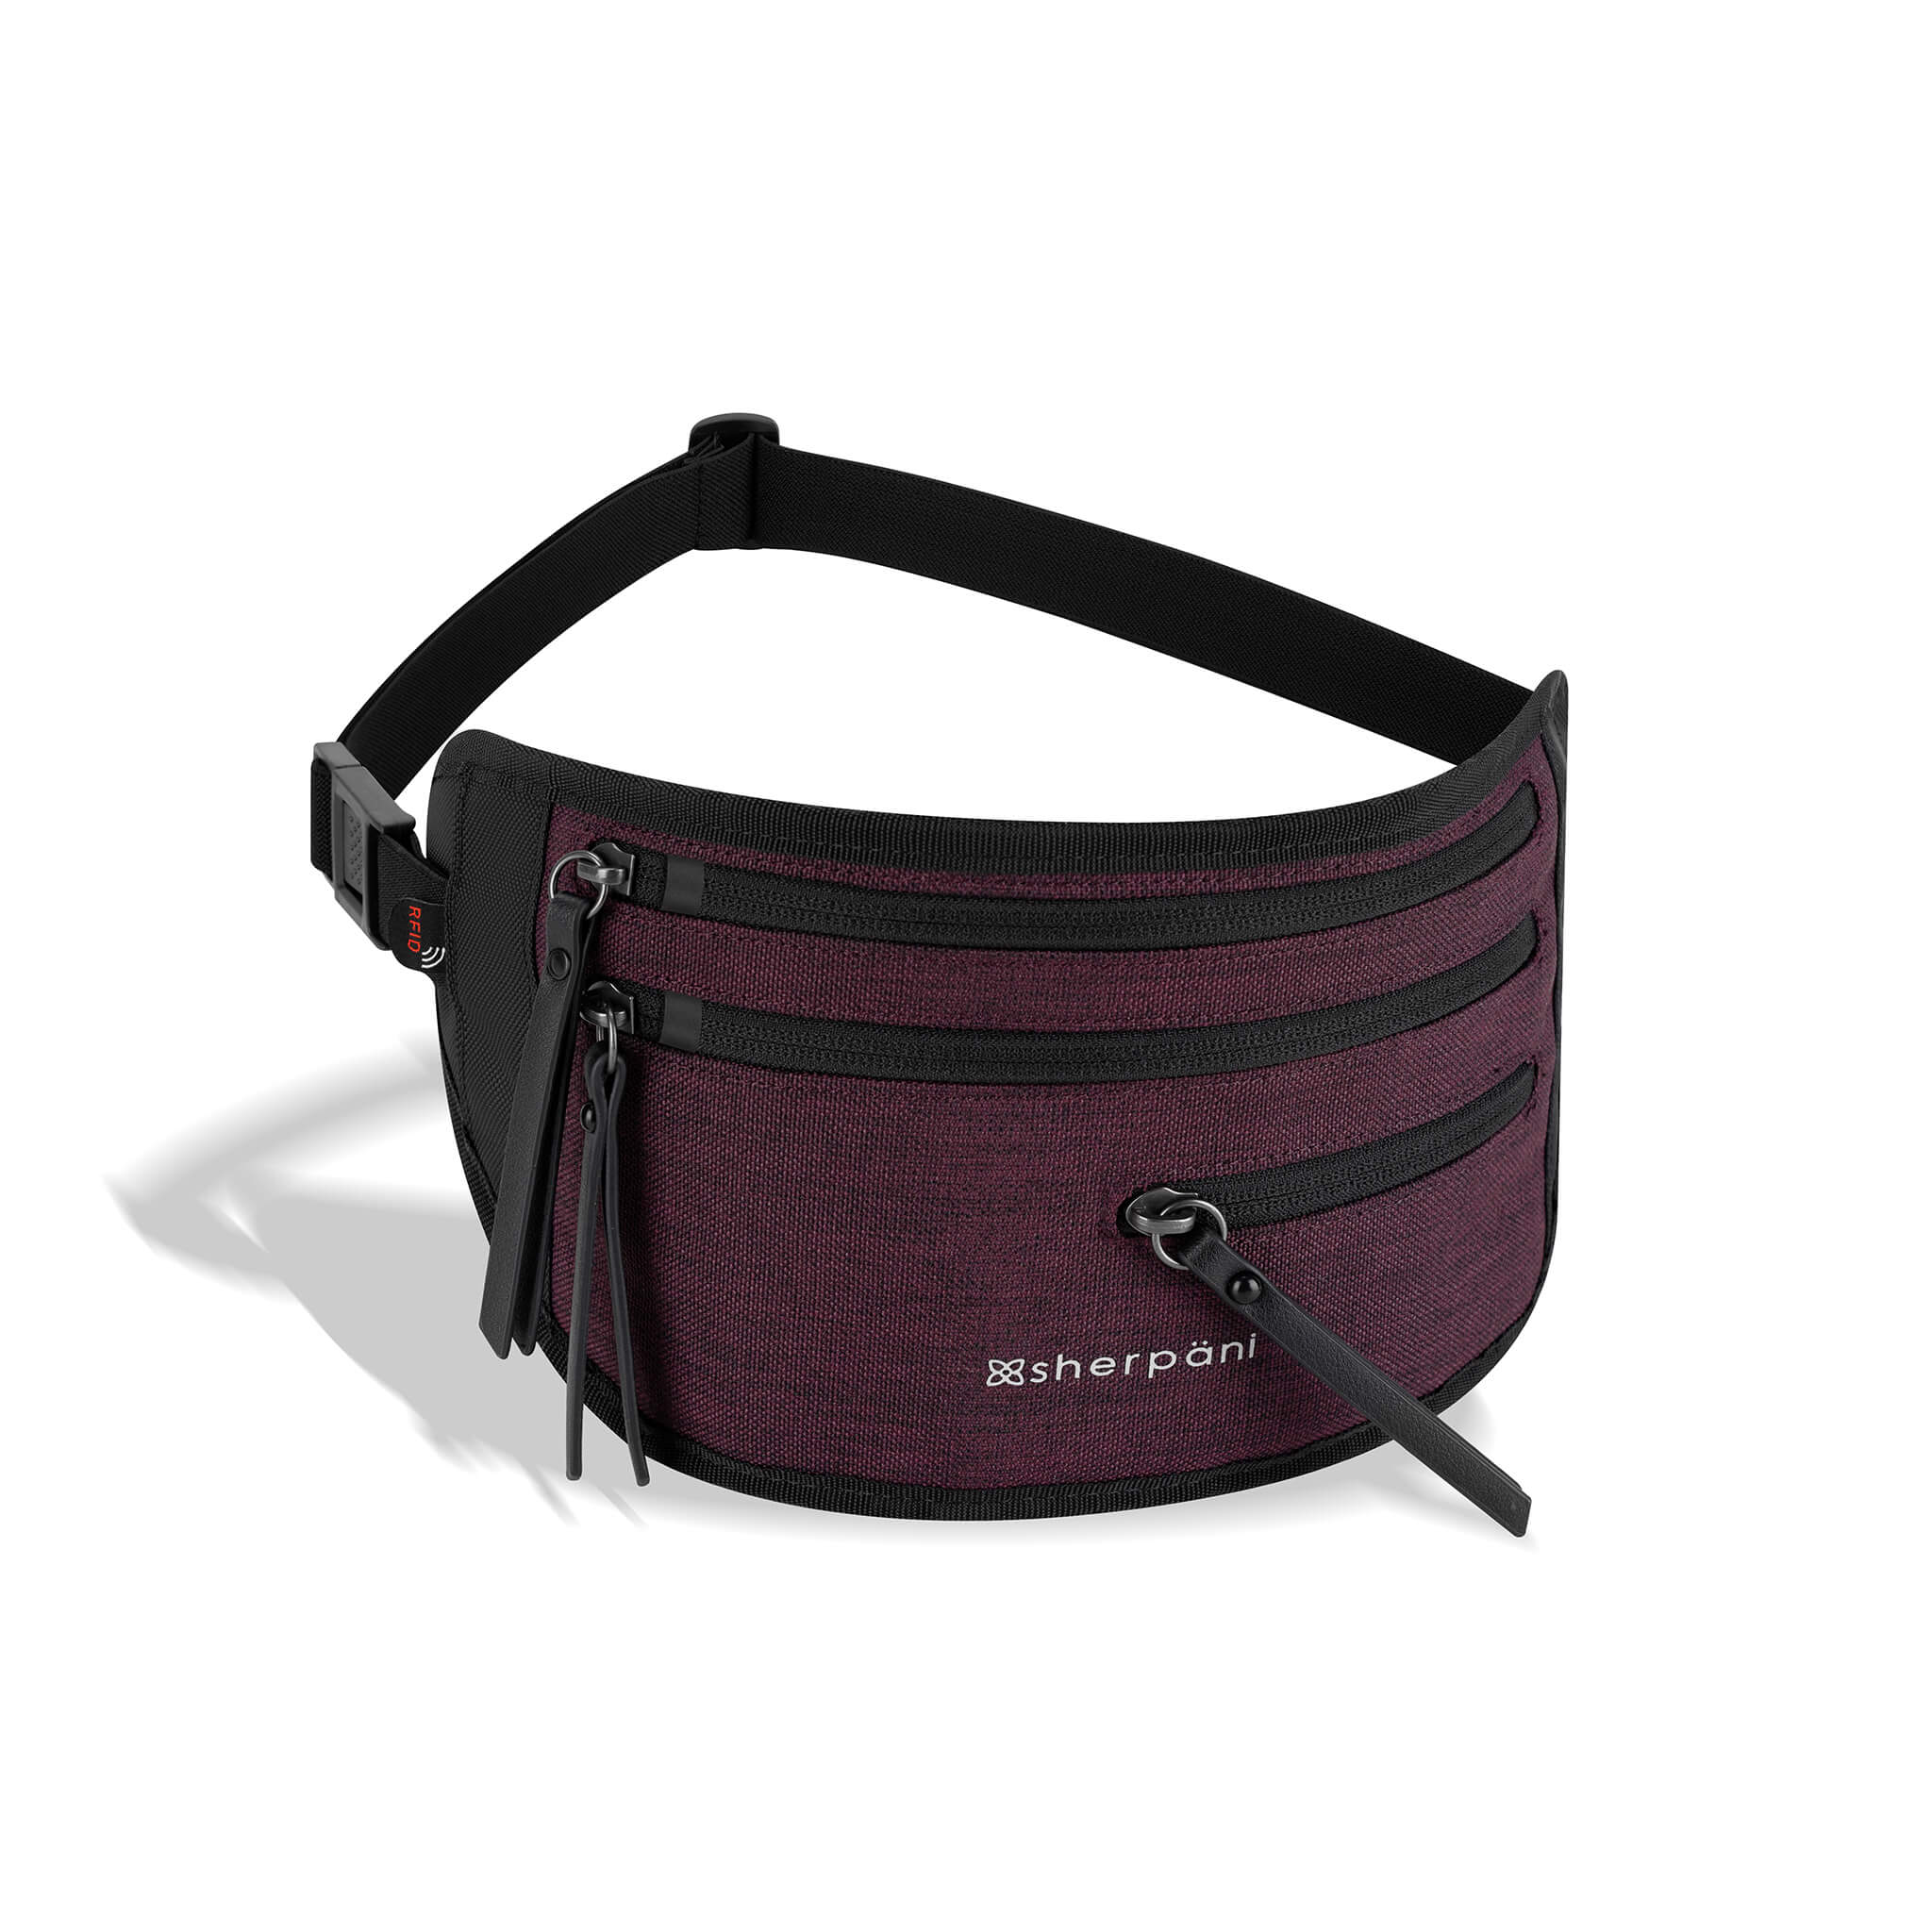 Angled front view of the Jett in Merlot. This convenient travel belt has lockable zippers and RFID protection, it makes the perfect hiding spot for your passport and other travel essentials. 